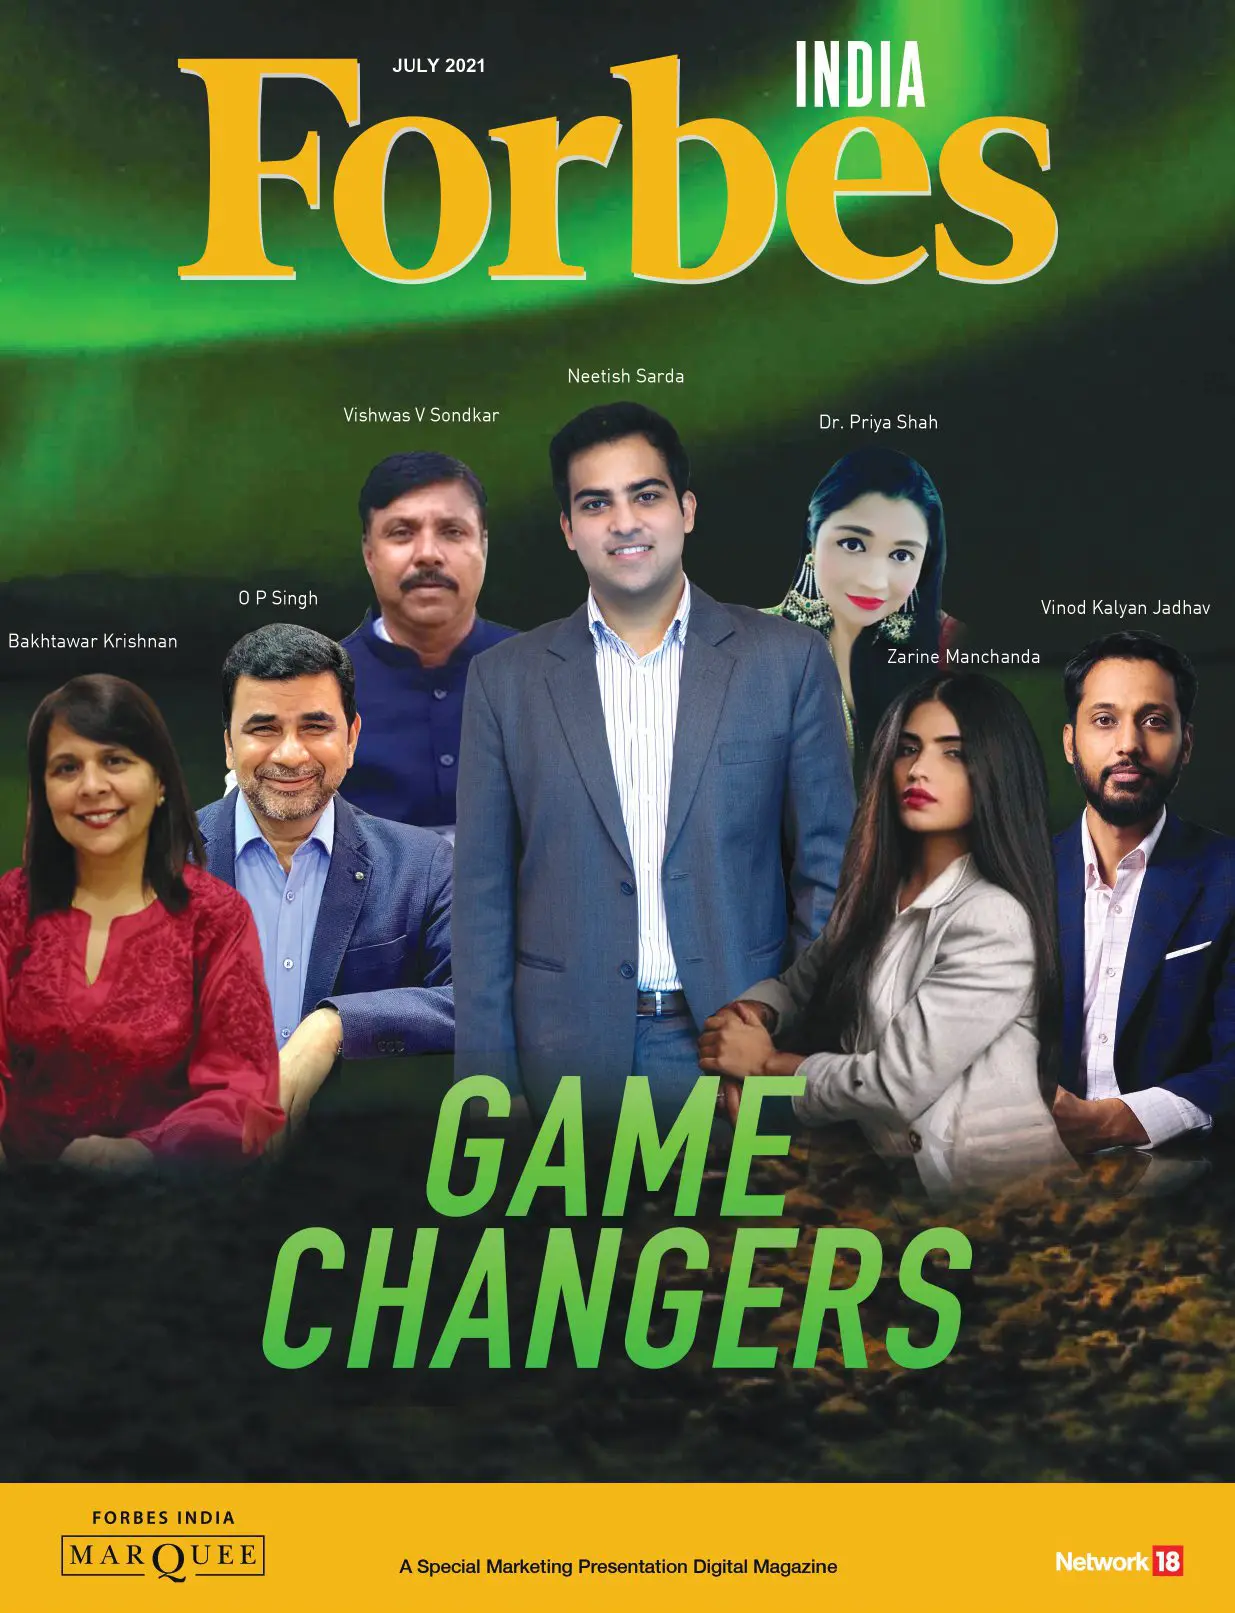 Neetish Sarda featured in Forbes India Marquee Edition- Game Changers